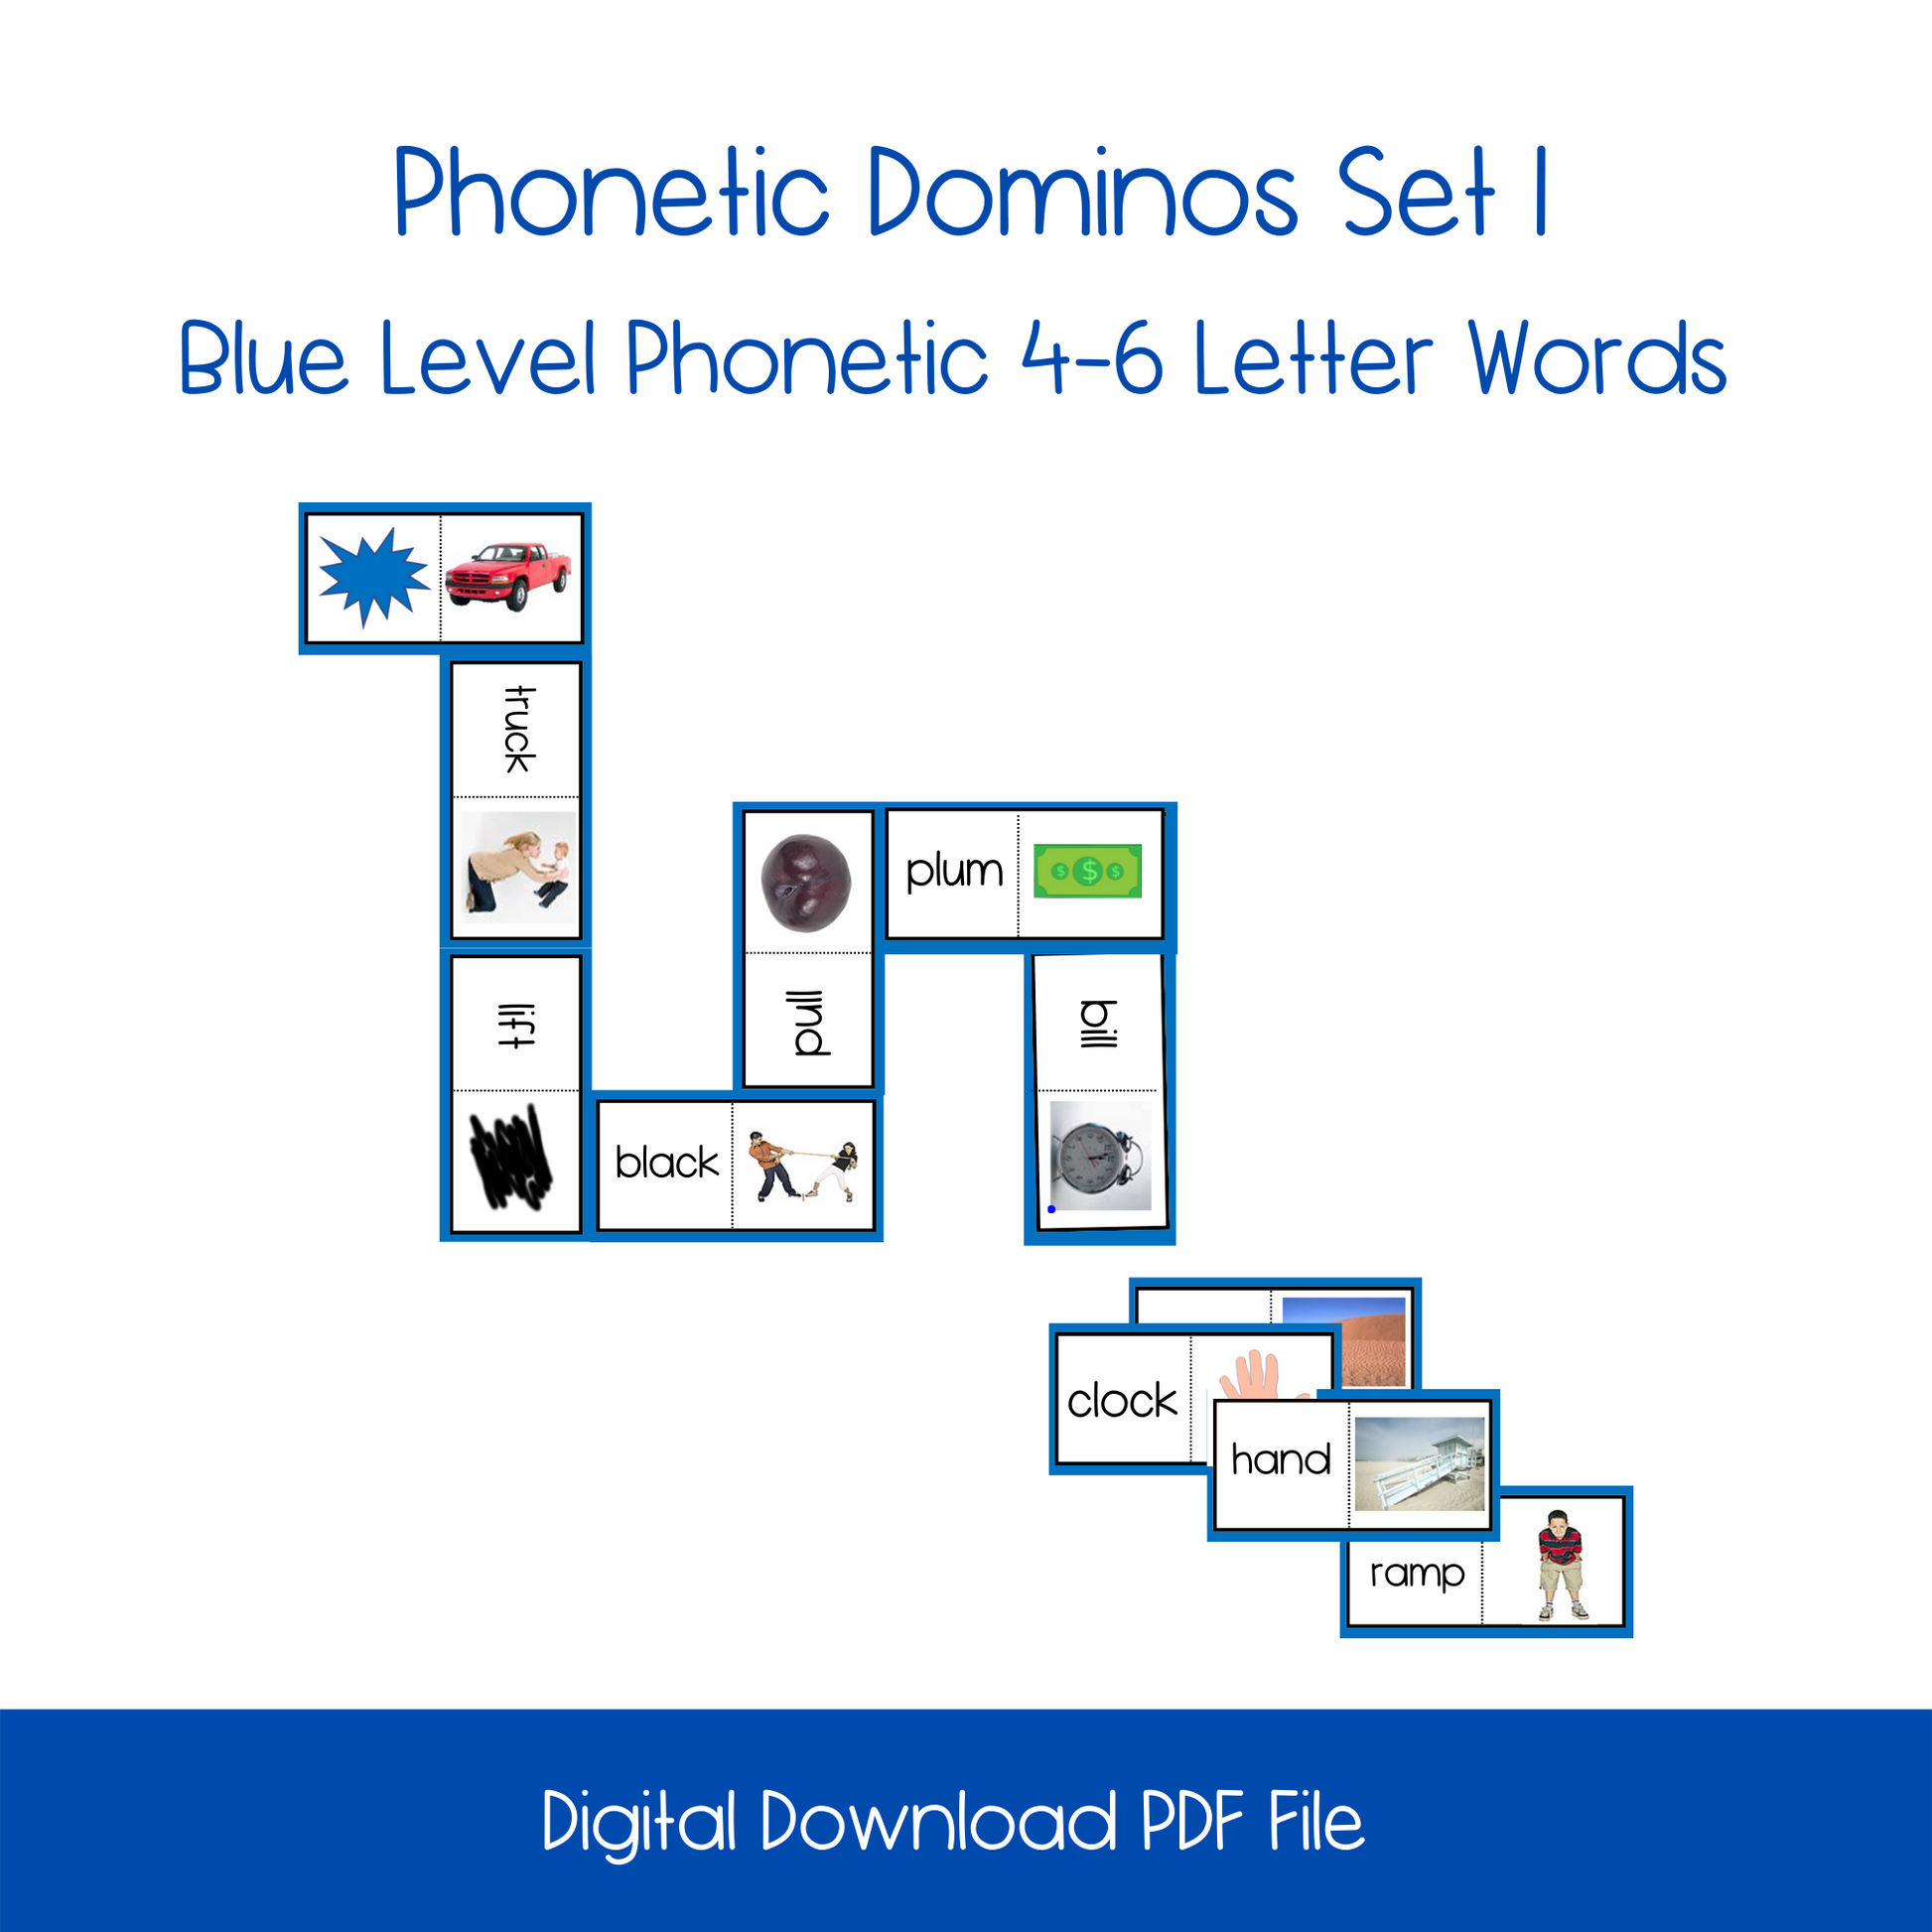 Printable Phonetic Reading Sounds Activity, printable Montessori Printable Phonetic Reading Sounds Activity, printable Phonetic reading game activity, Printable homeschool Phonetic Reading Sounds Activity, Printable montessoriPhonetic Reading Sounds Activity, printable Phonetic reading activity, printable ESL activity